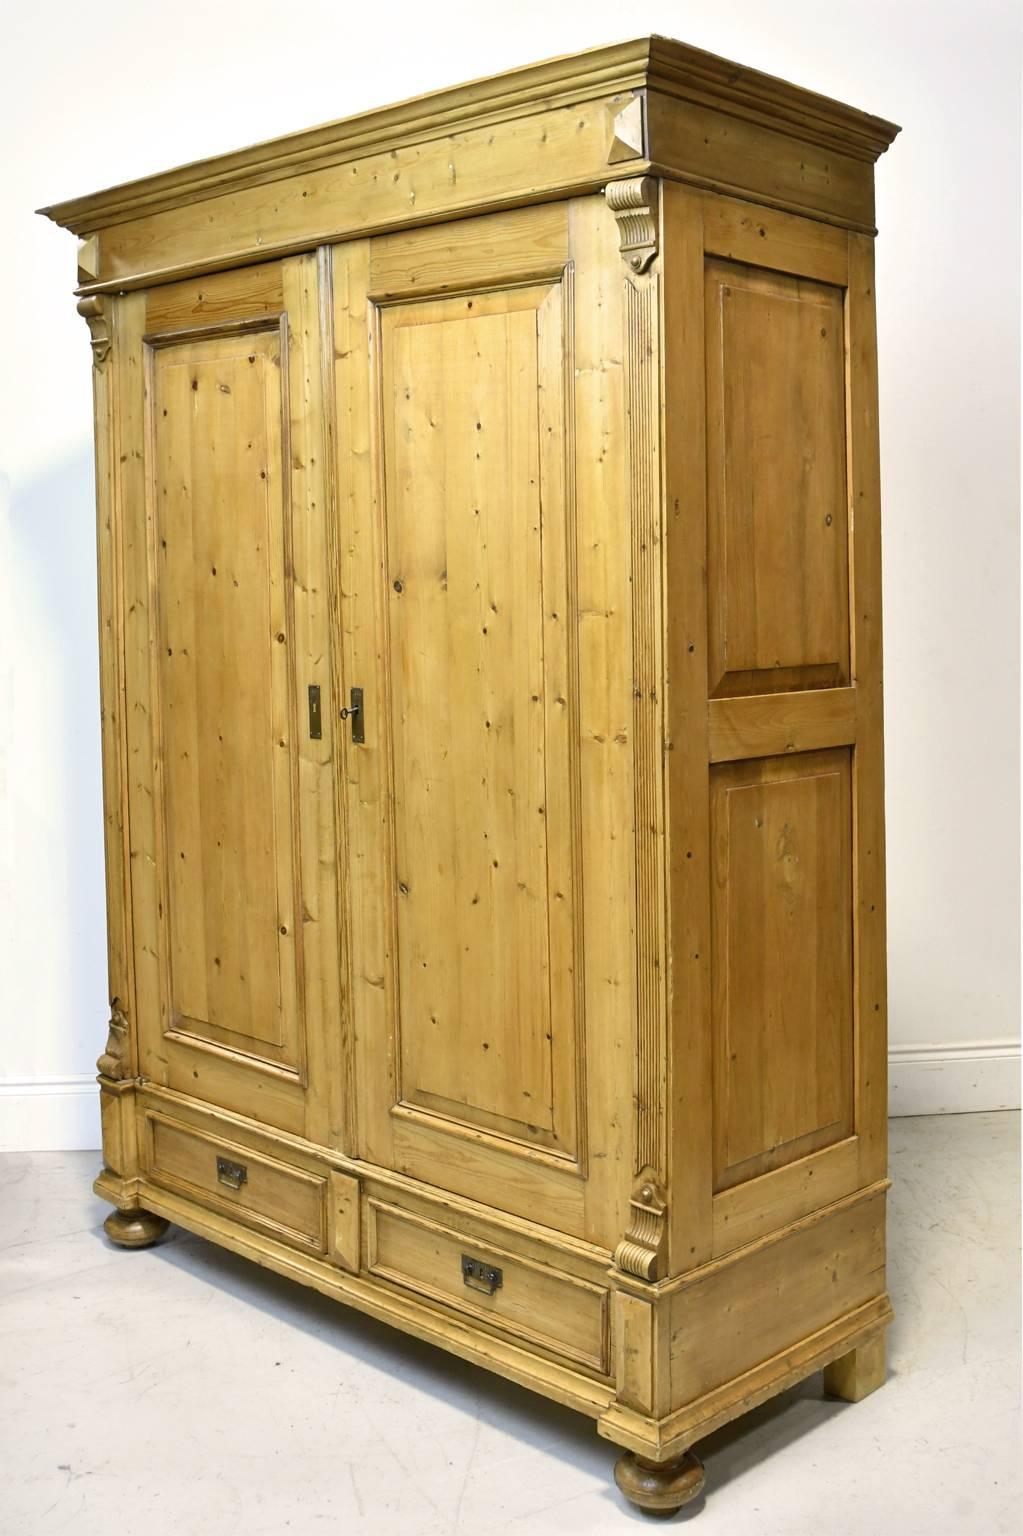 German 19th Century European Two-Door Armoire in Pine with Drawers & Interior Shelves